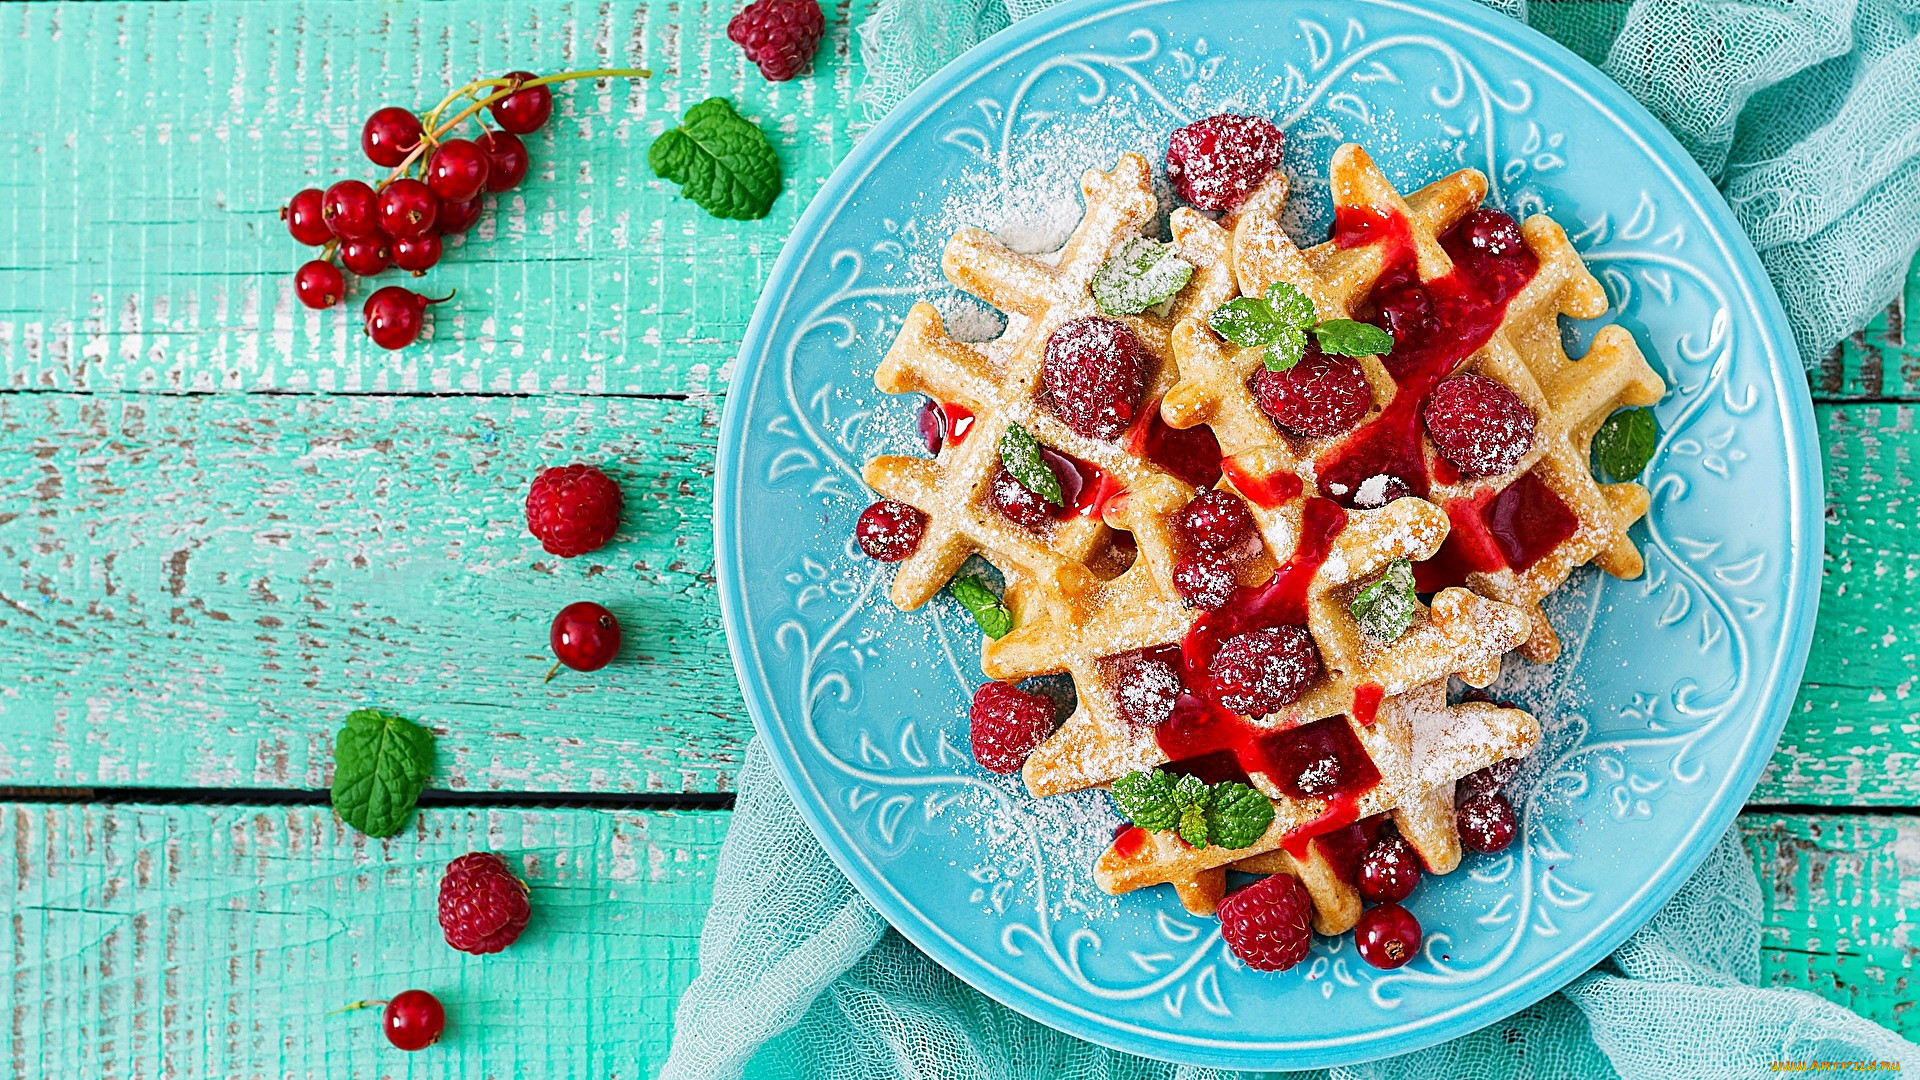 Food Sweets Waffles Fruit Berries Colorful 1920x1080